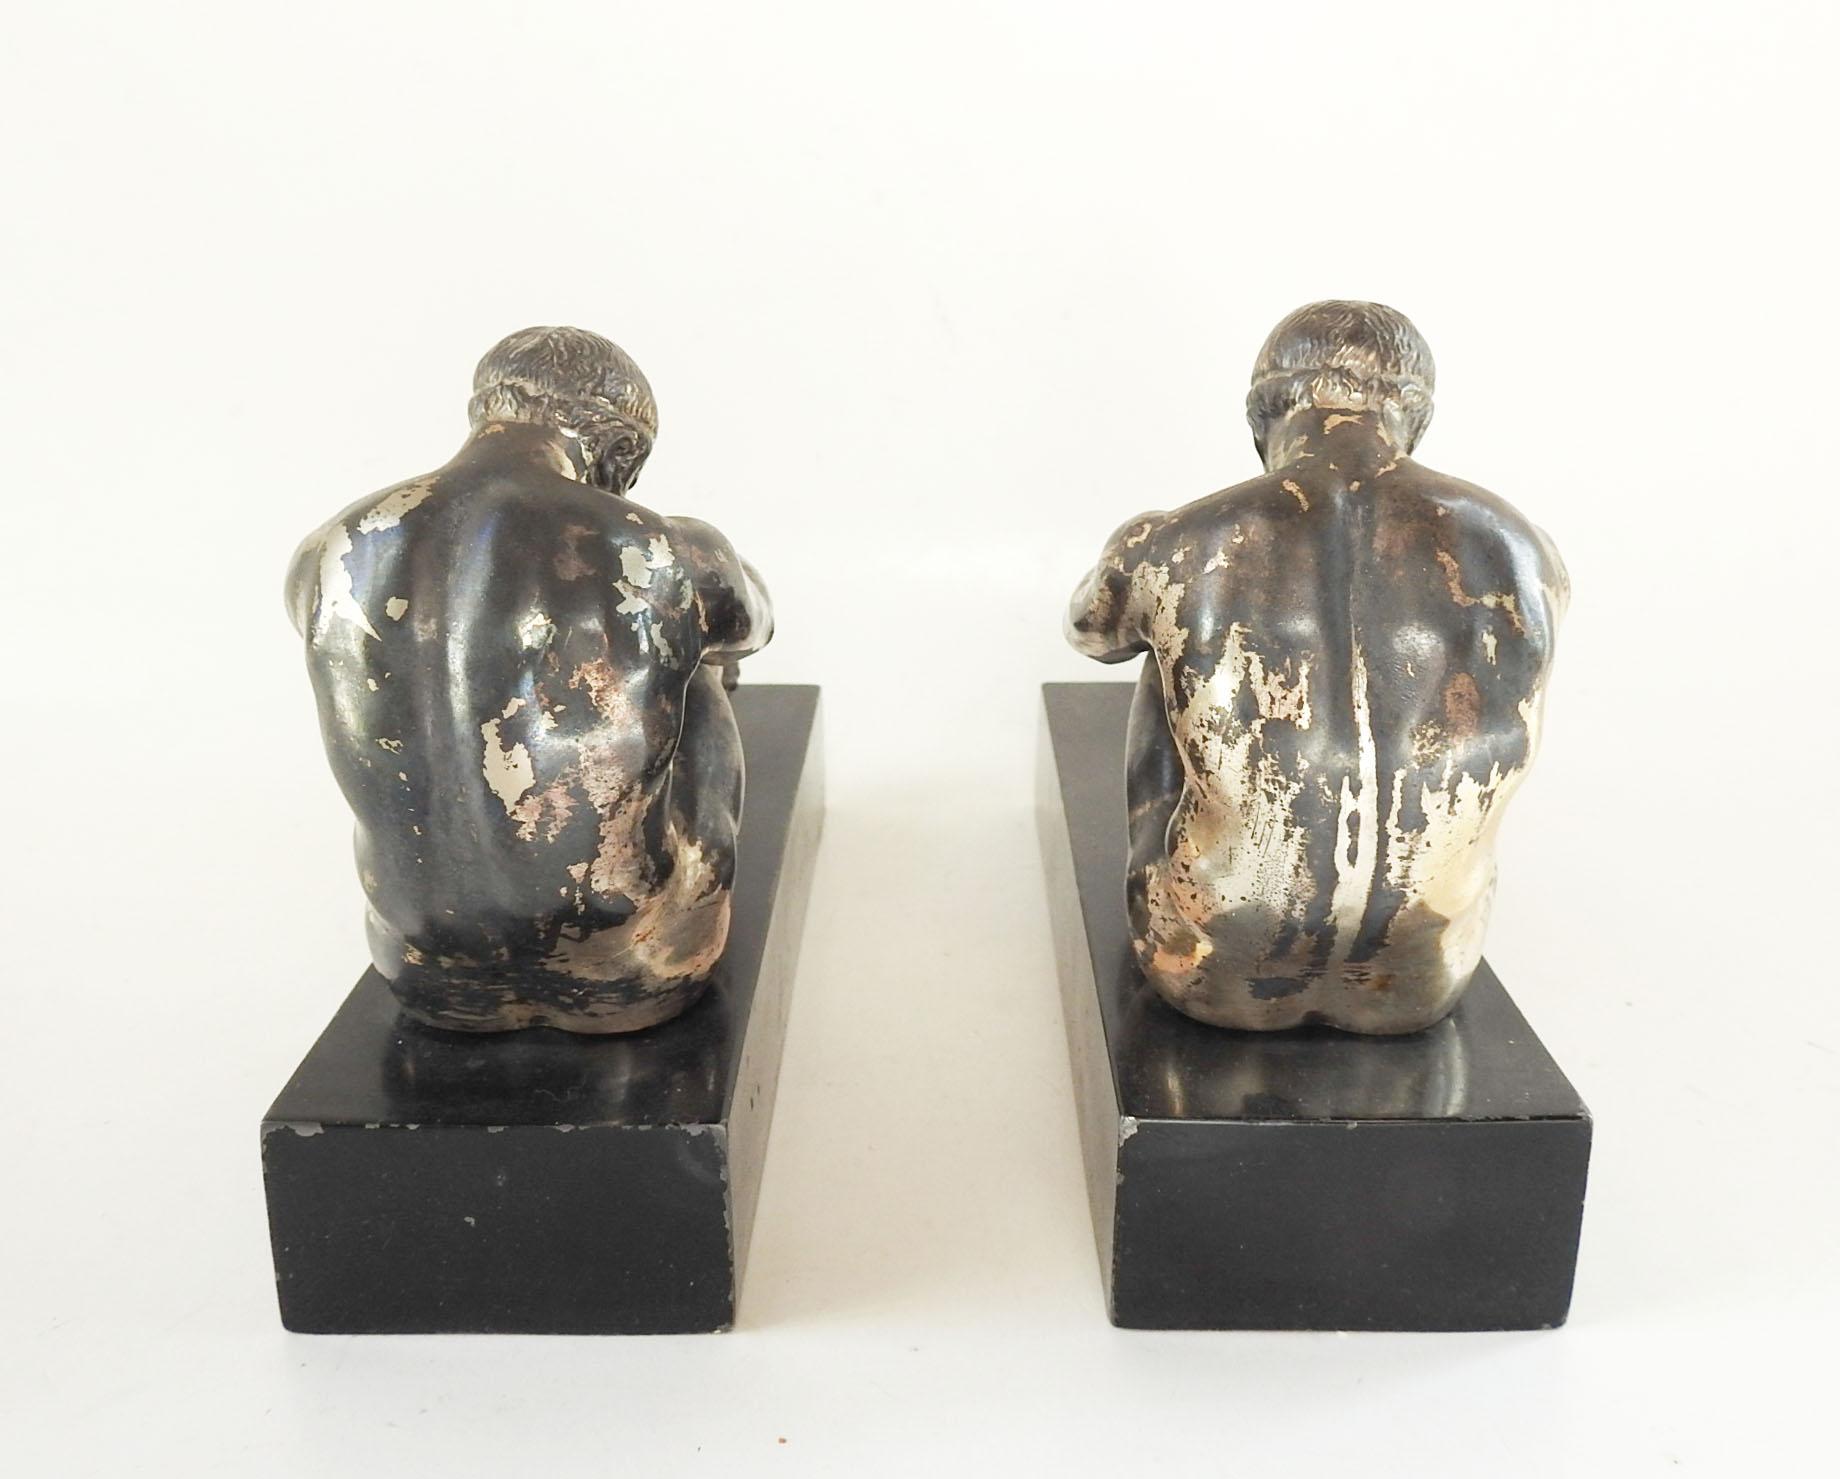 Neoclassical Vintage Ronson Art Deco Greek Athlete Bookends For Sale